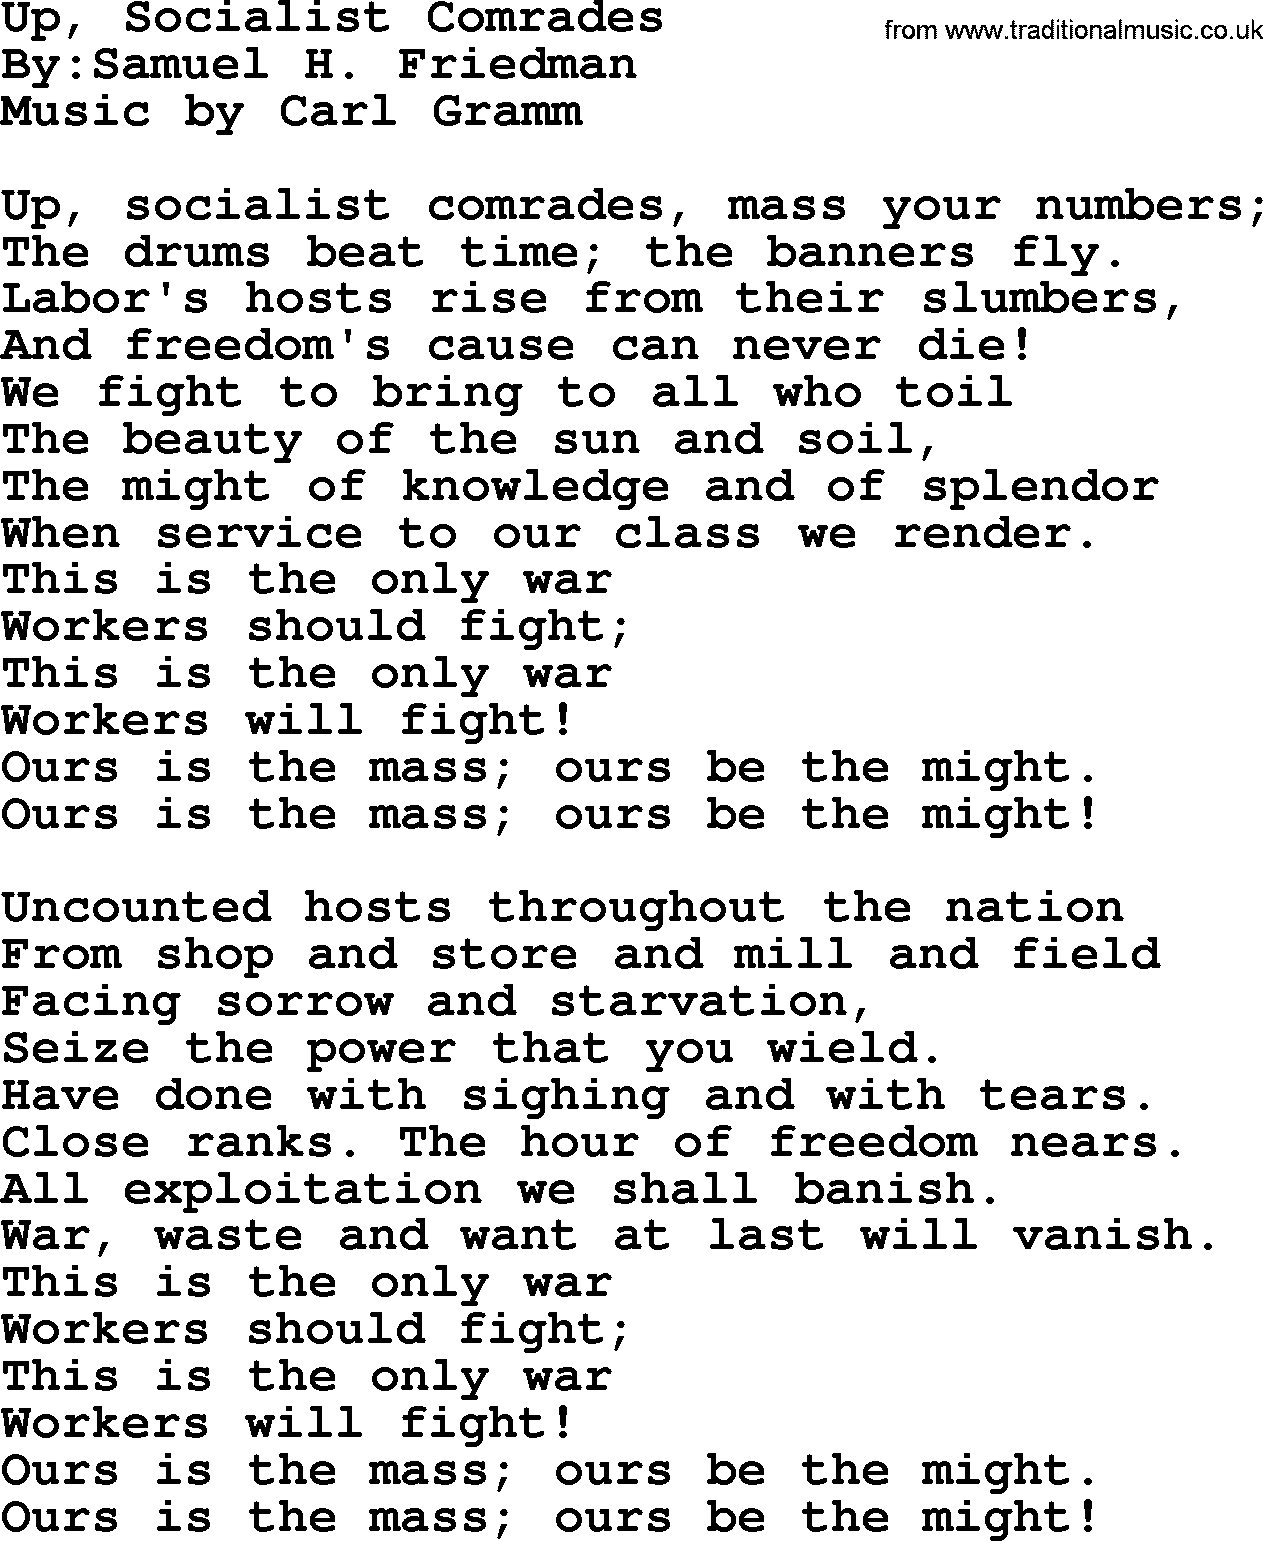 Political, Solidarity, Workers or Union song: Up Socialist Comrades, lyrics